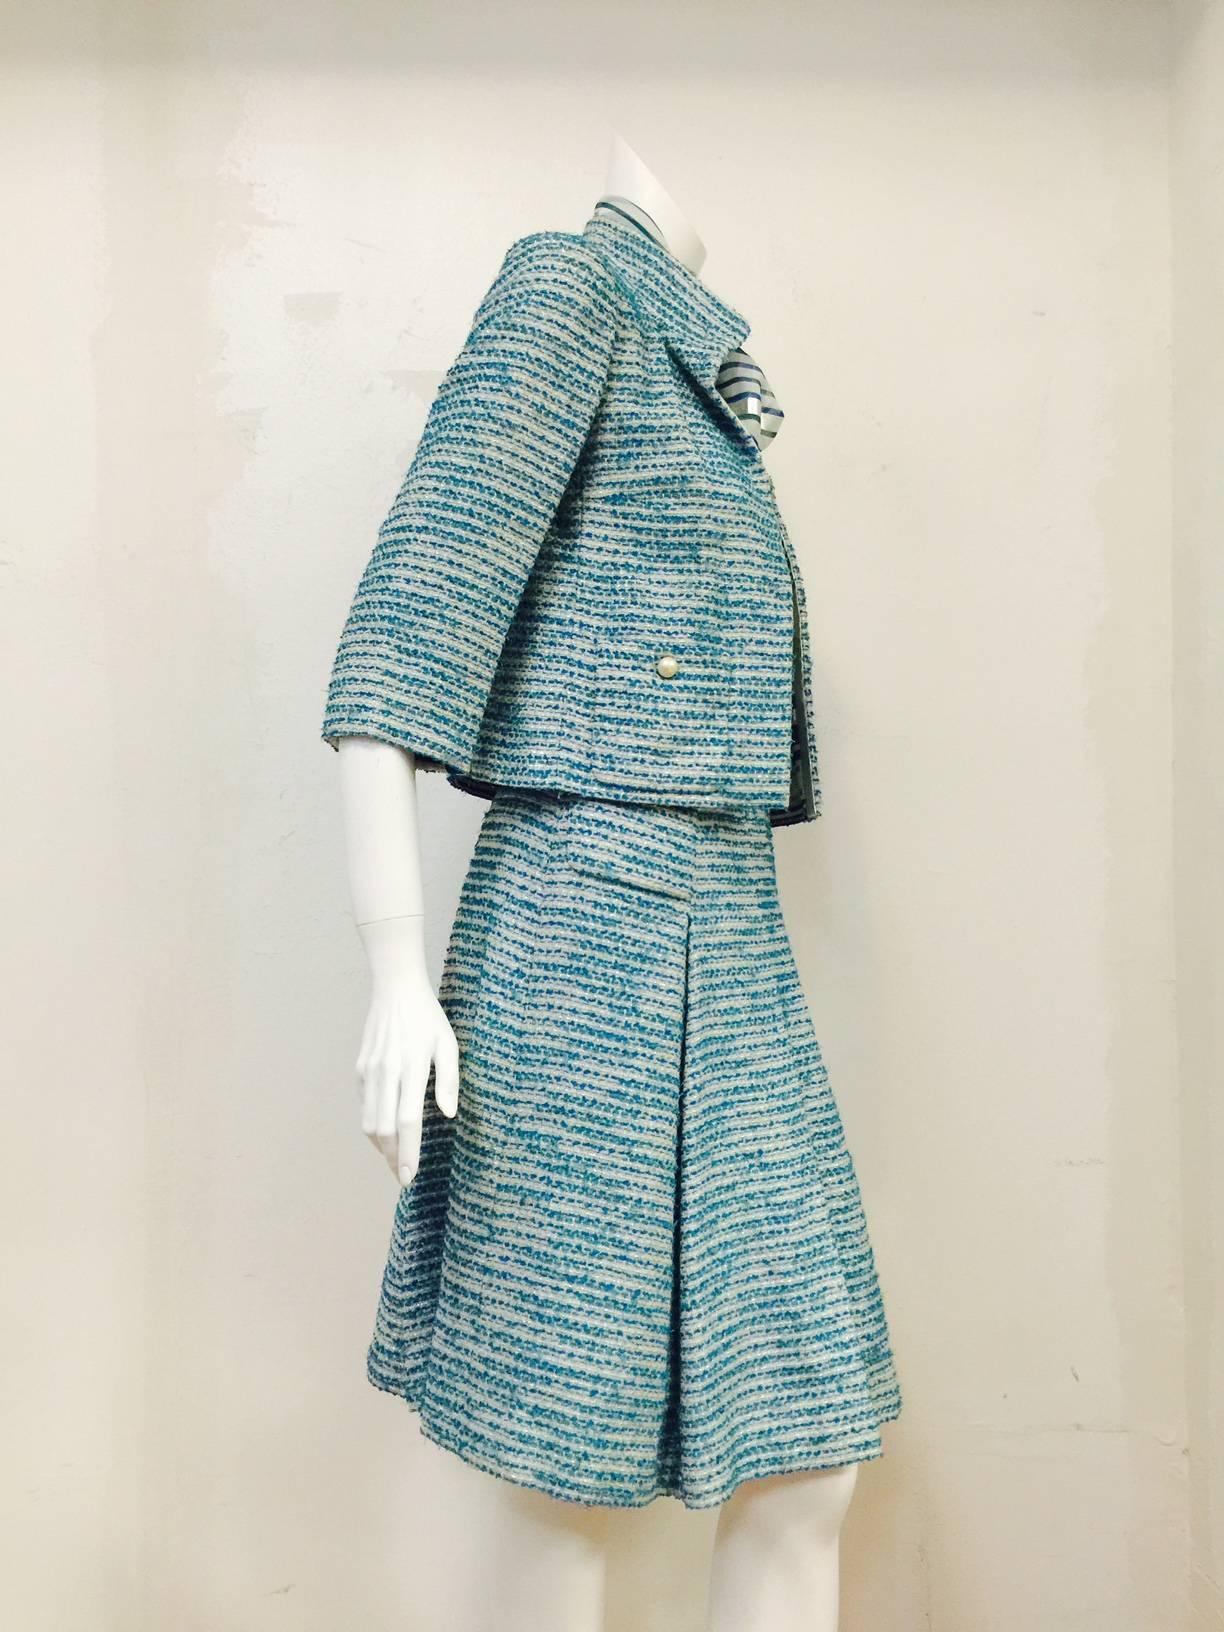 Chanel Spring 2001 Teal and Metallic Silver 3-Piece Ensemble is worthy of Coco herself!  Features a luxurious tweed blend that incorporates silver metallic thread for added sparkle!  Features full, pleated skirt, jacket and complementary blouse. 